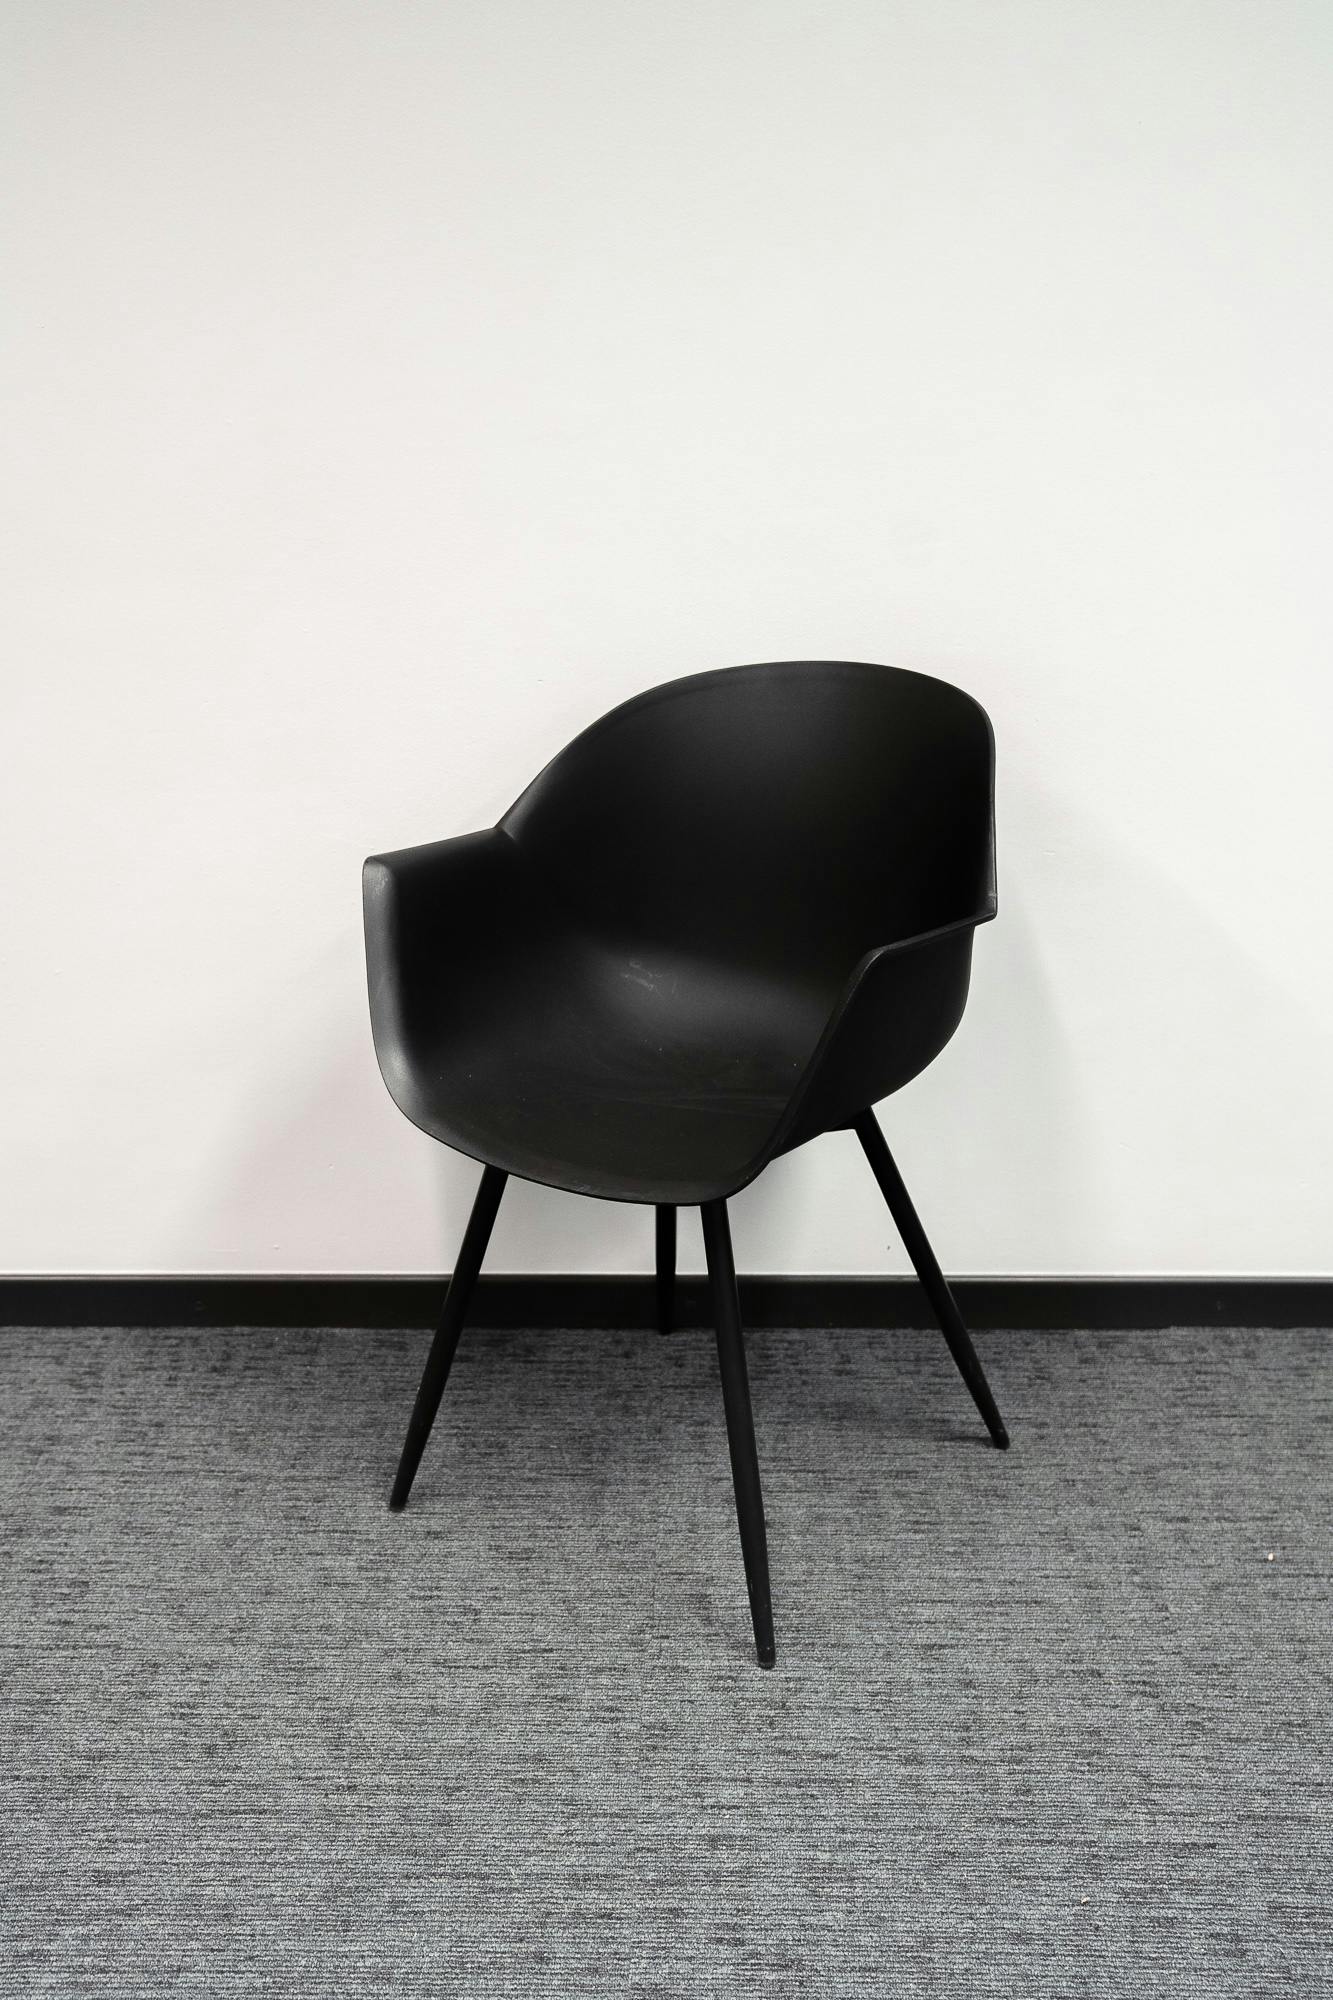 Black designer chair - Second hand quality "Chairs" - Relieve Furniture - 2